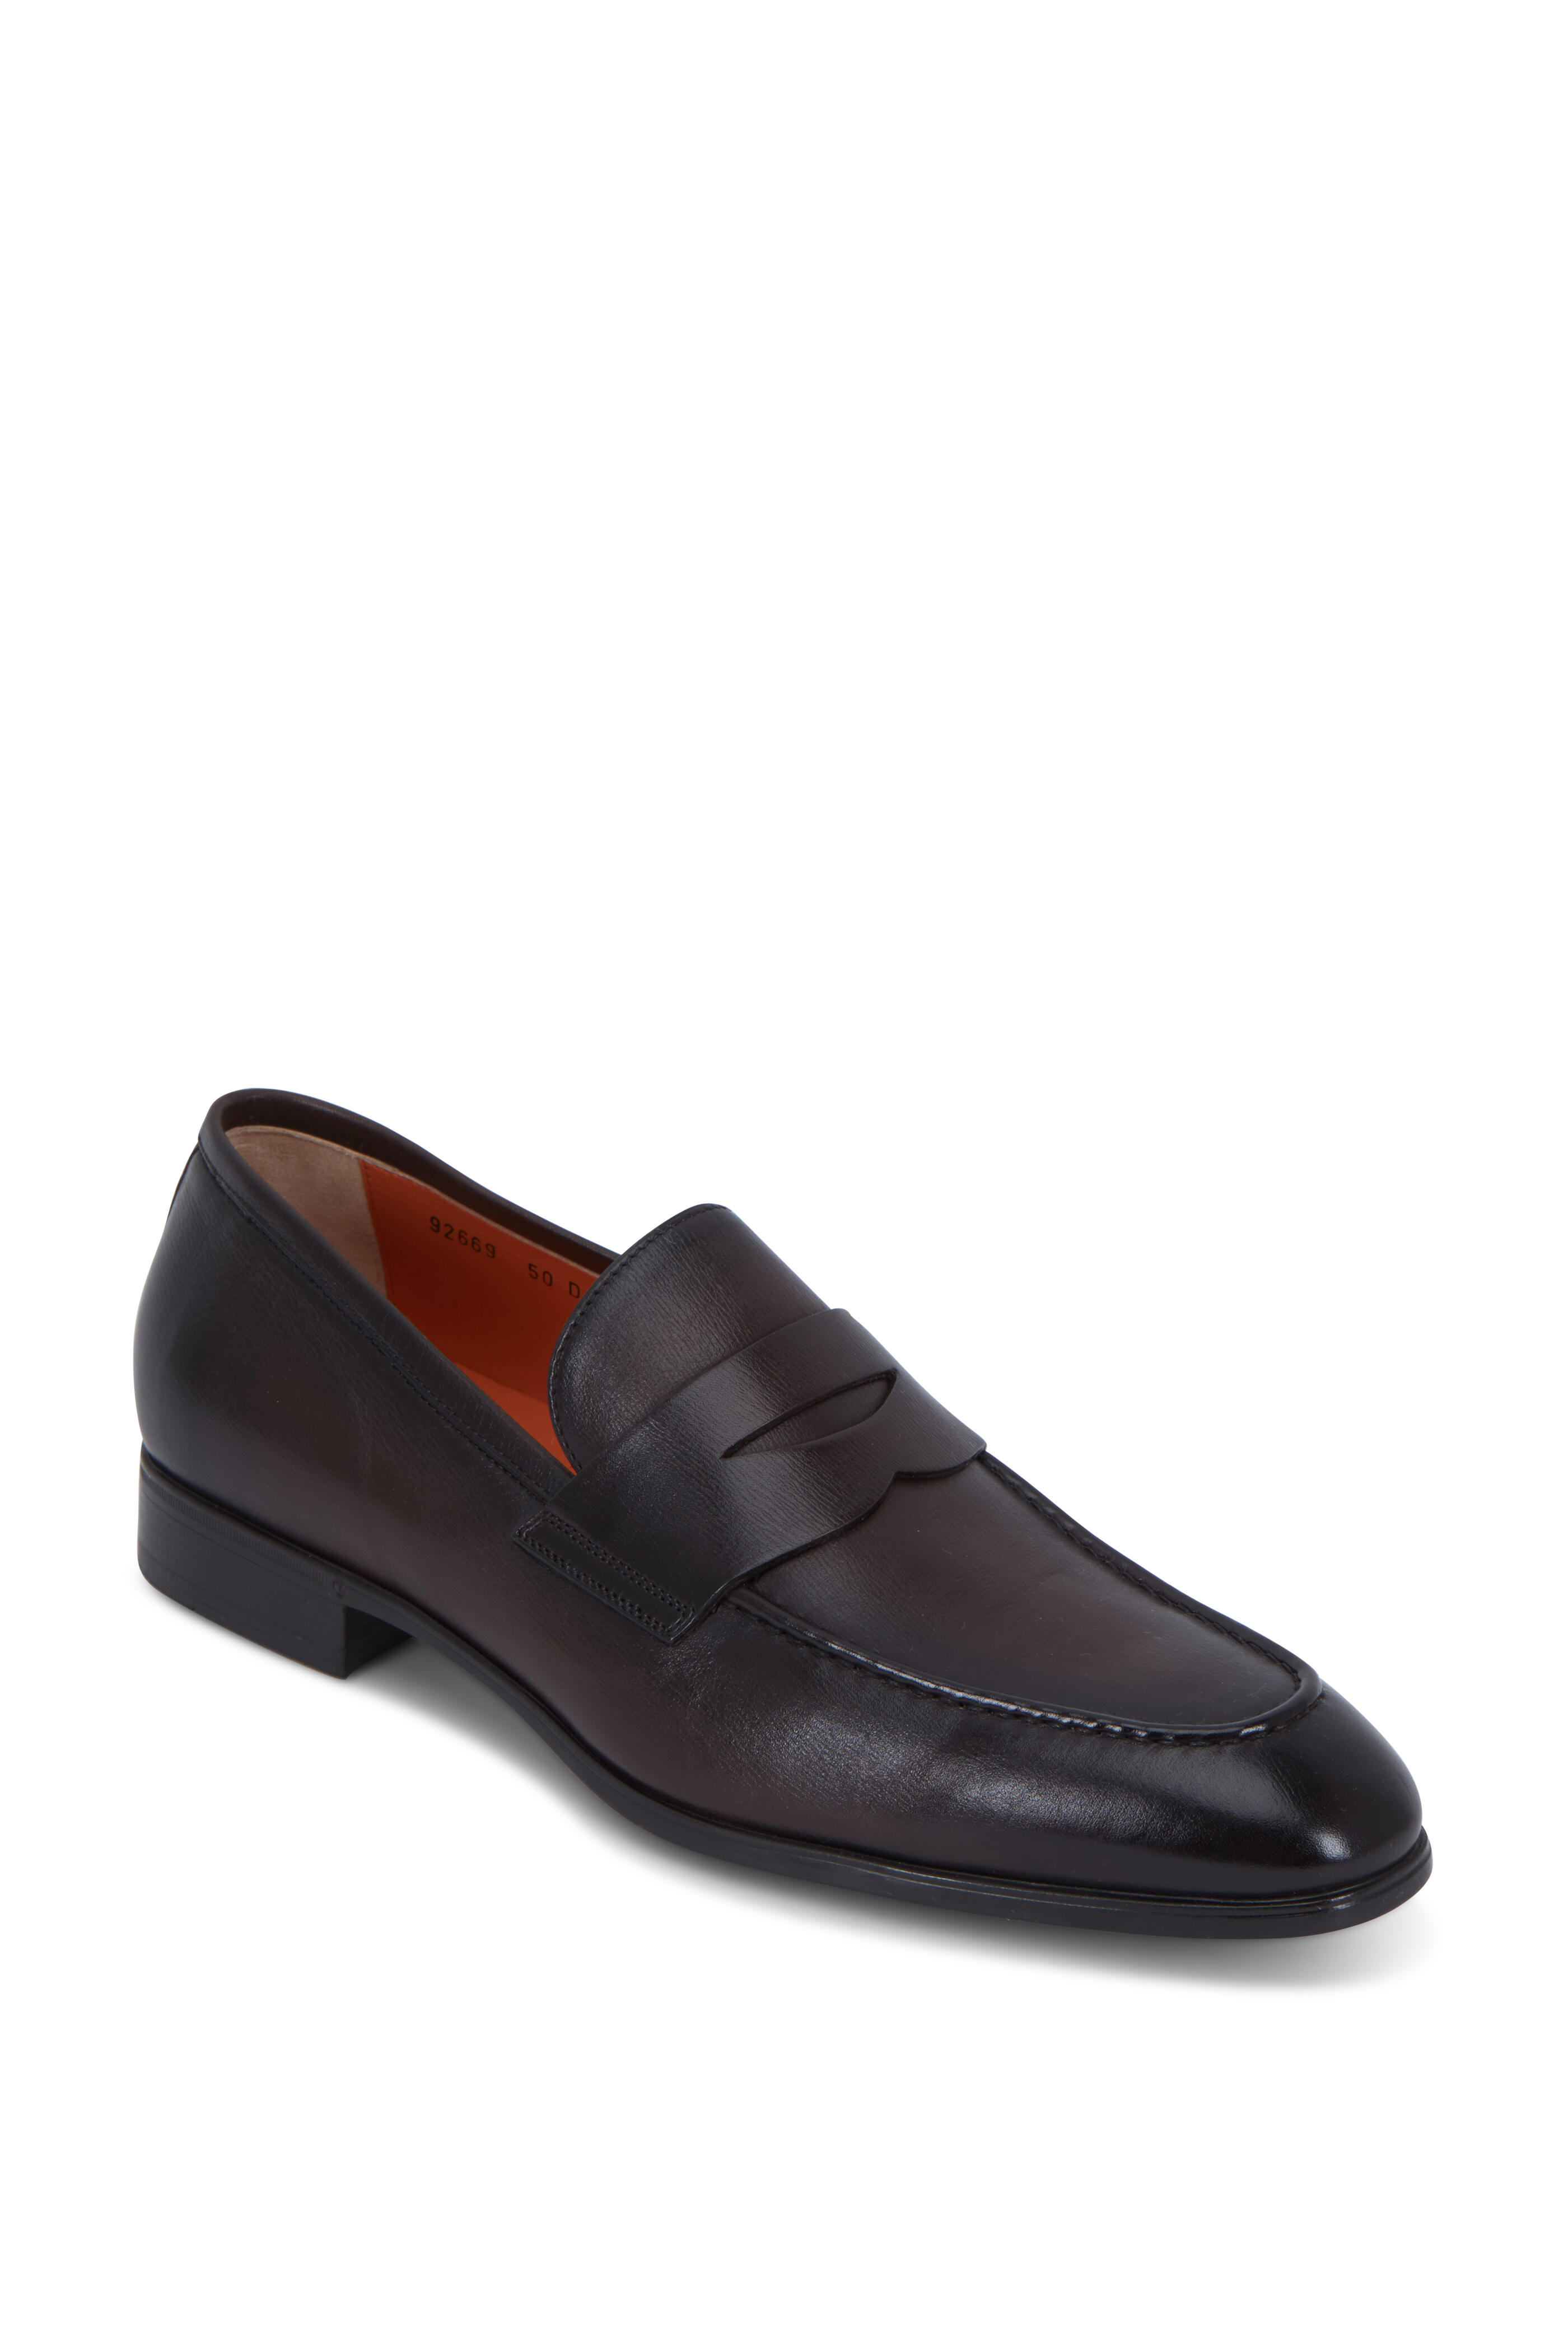 Santoni - Gavin Dark Brown Leather Penny Loafer | Mitchell Stores